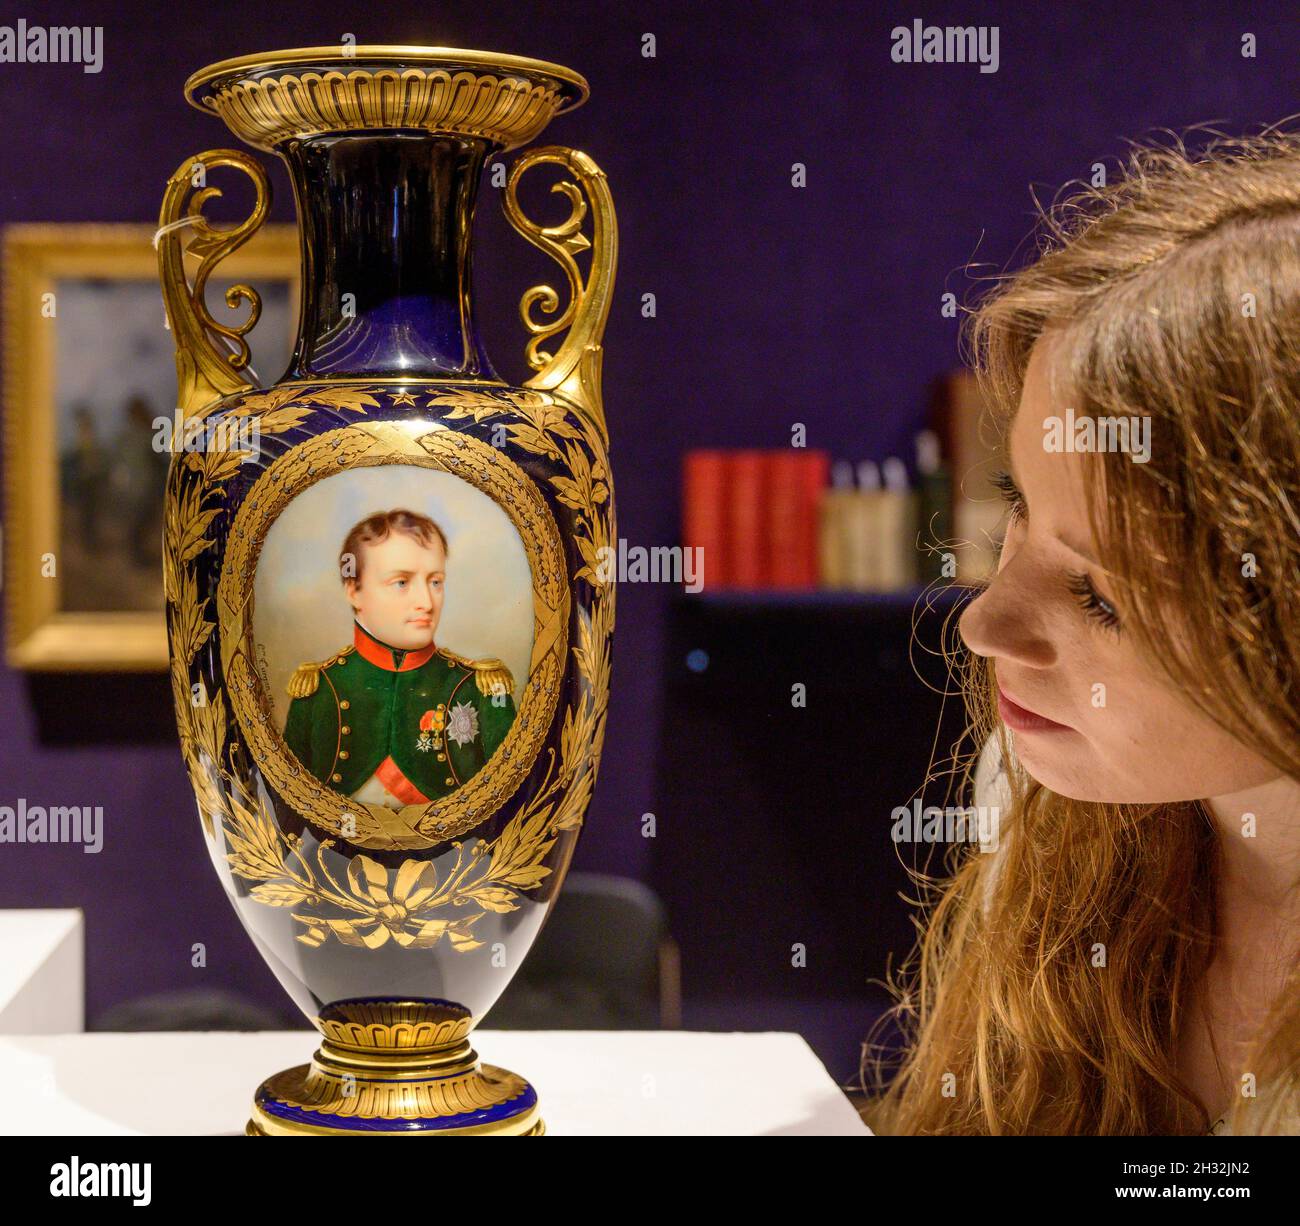 Bonhams, London, UK. 25 October 2021. Personal items and artefacts from the Napoleonic period include paintings, manuscripts, Bicorne Hat, china and medals. Image: A Sèvres blue-ground vase 'carafe Étrusque' with the portrait of Napoleon I, dated 1852. £ 30,000 - 40,000. Credit: Malcolm Park/Alamy Live News Stock Photo